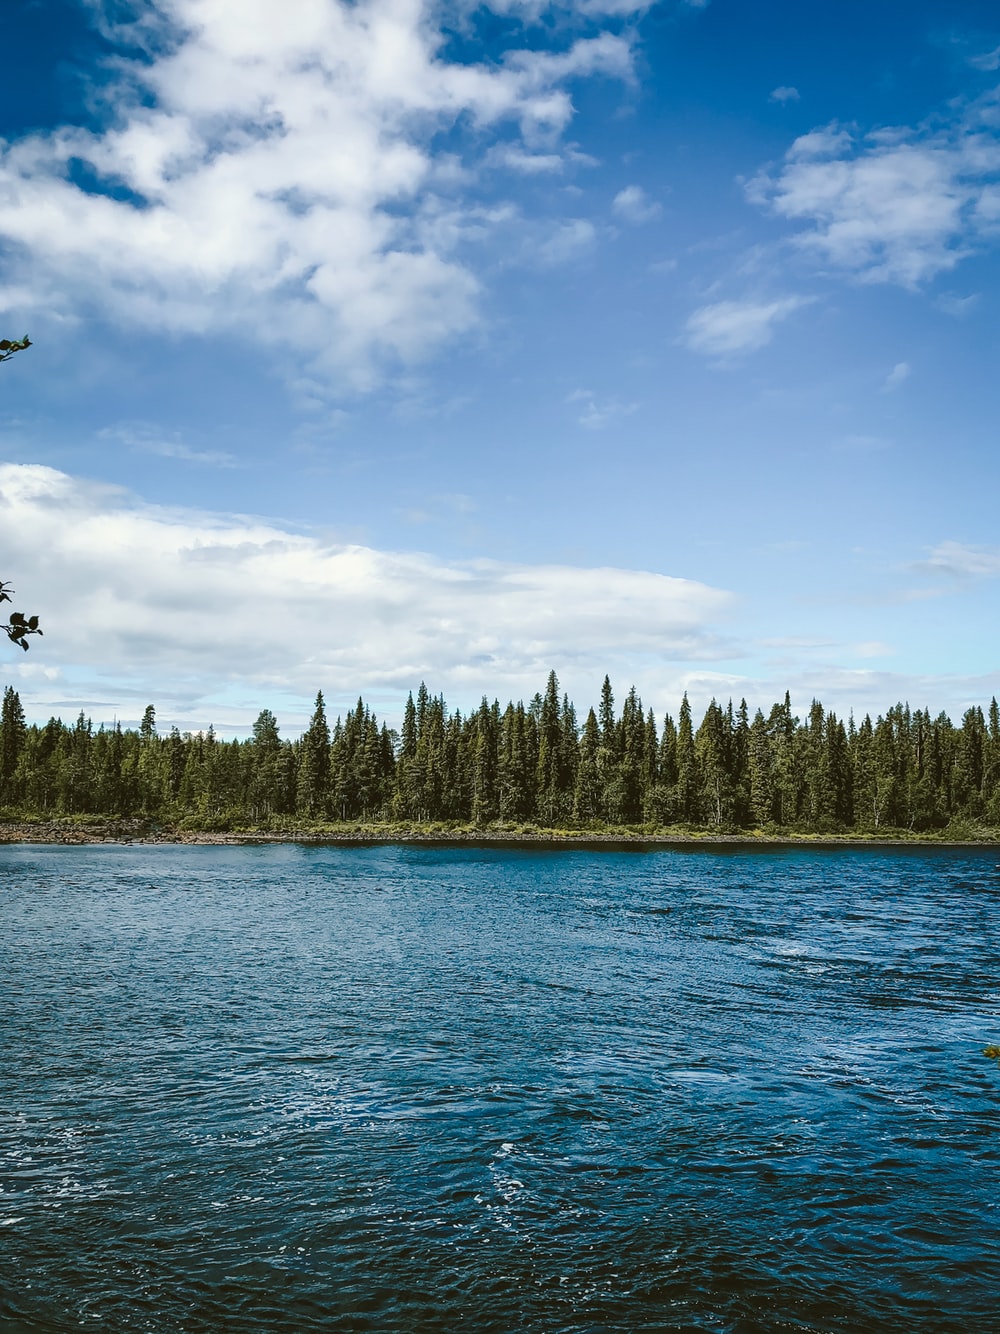 Blue River Picture. Download Free Image